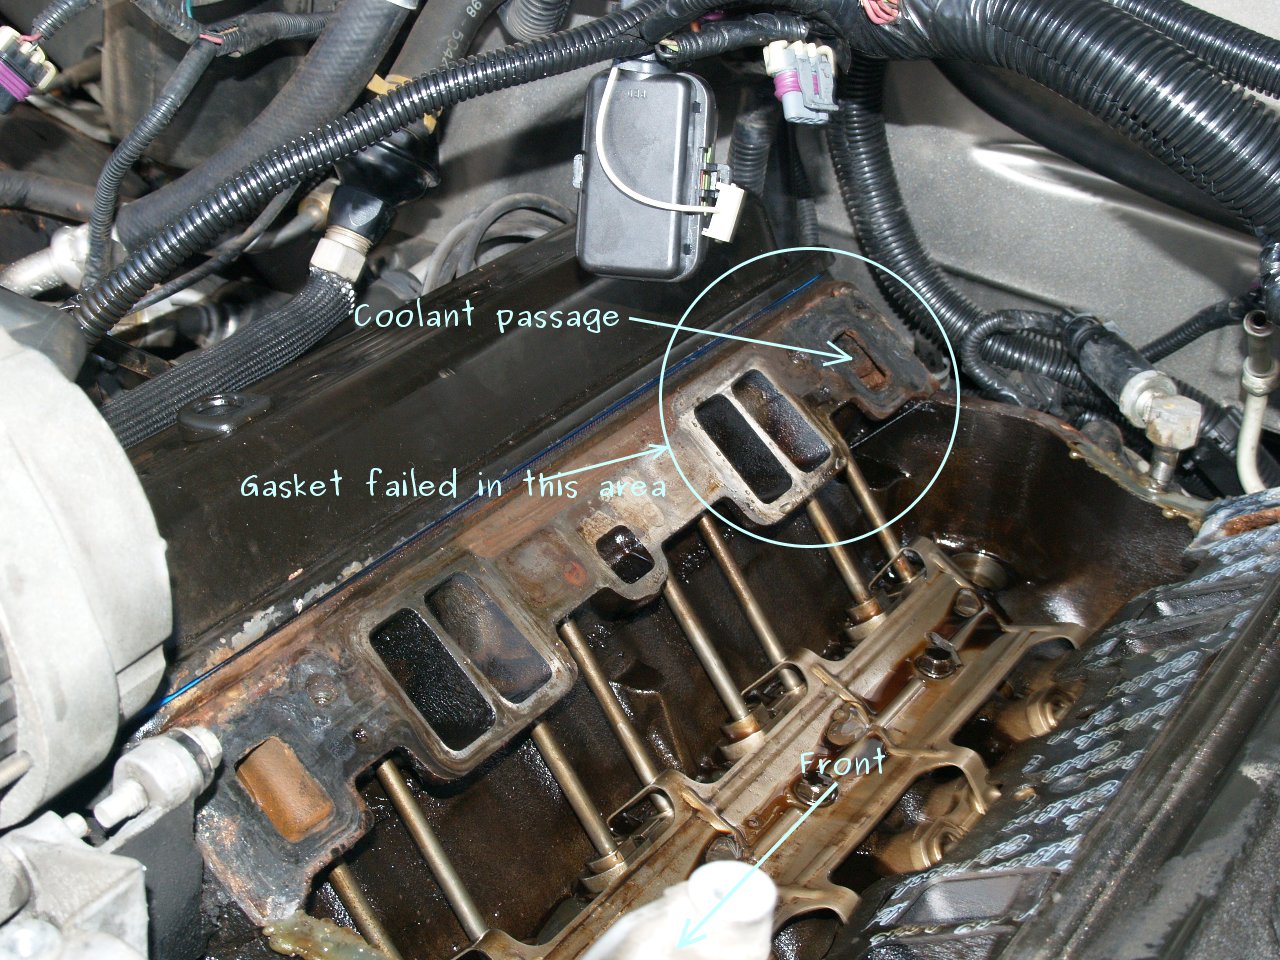 See P322E in engine